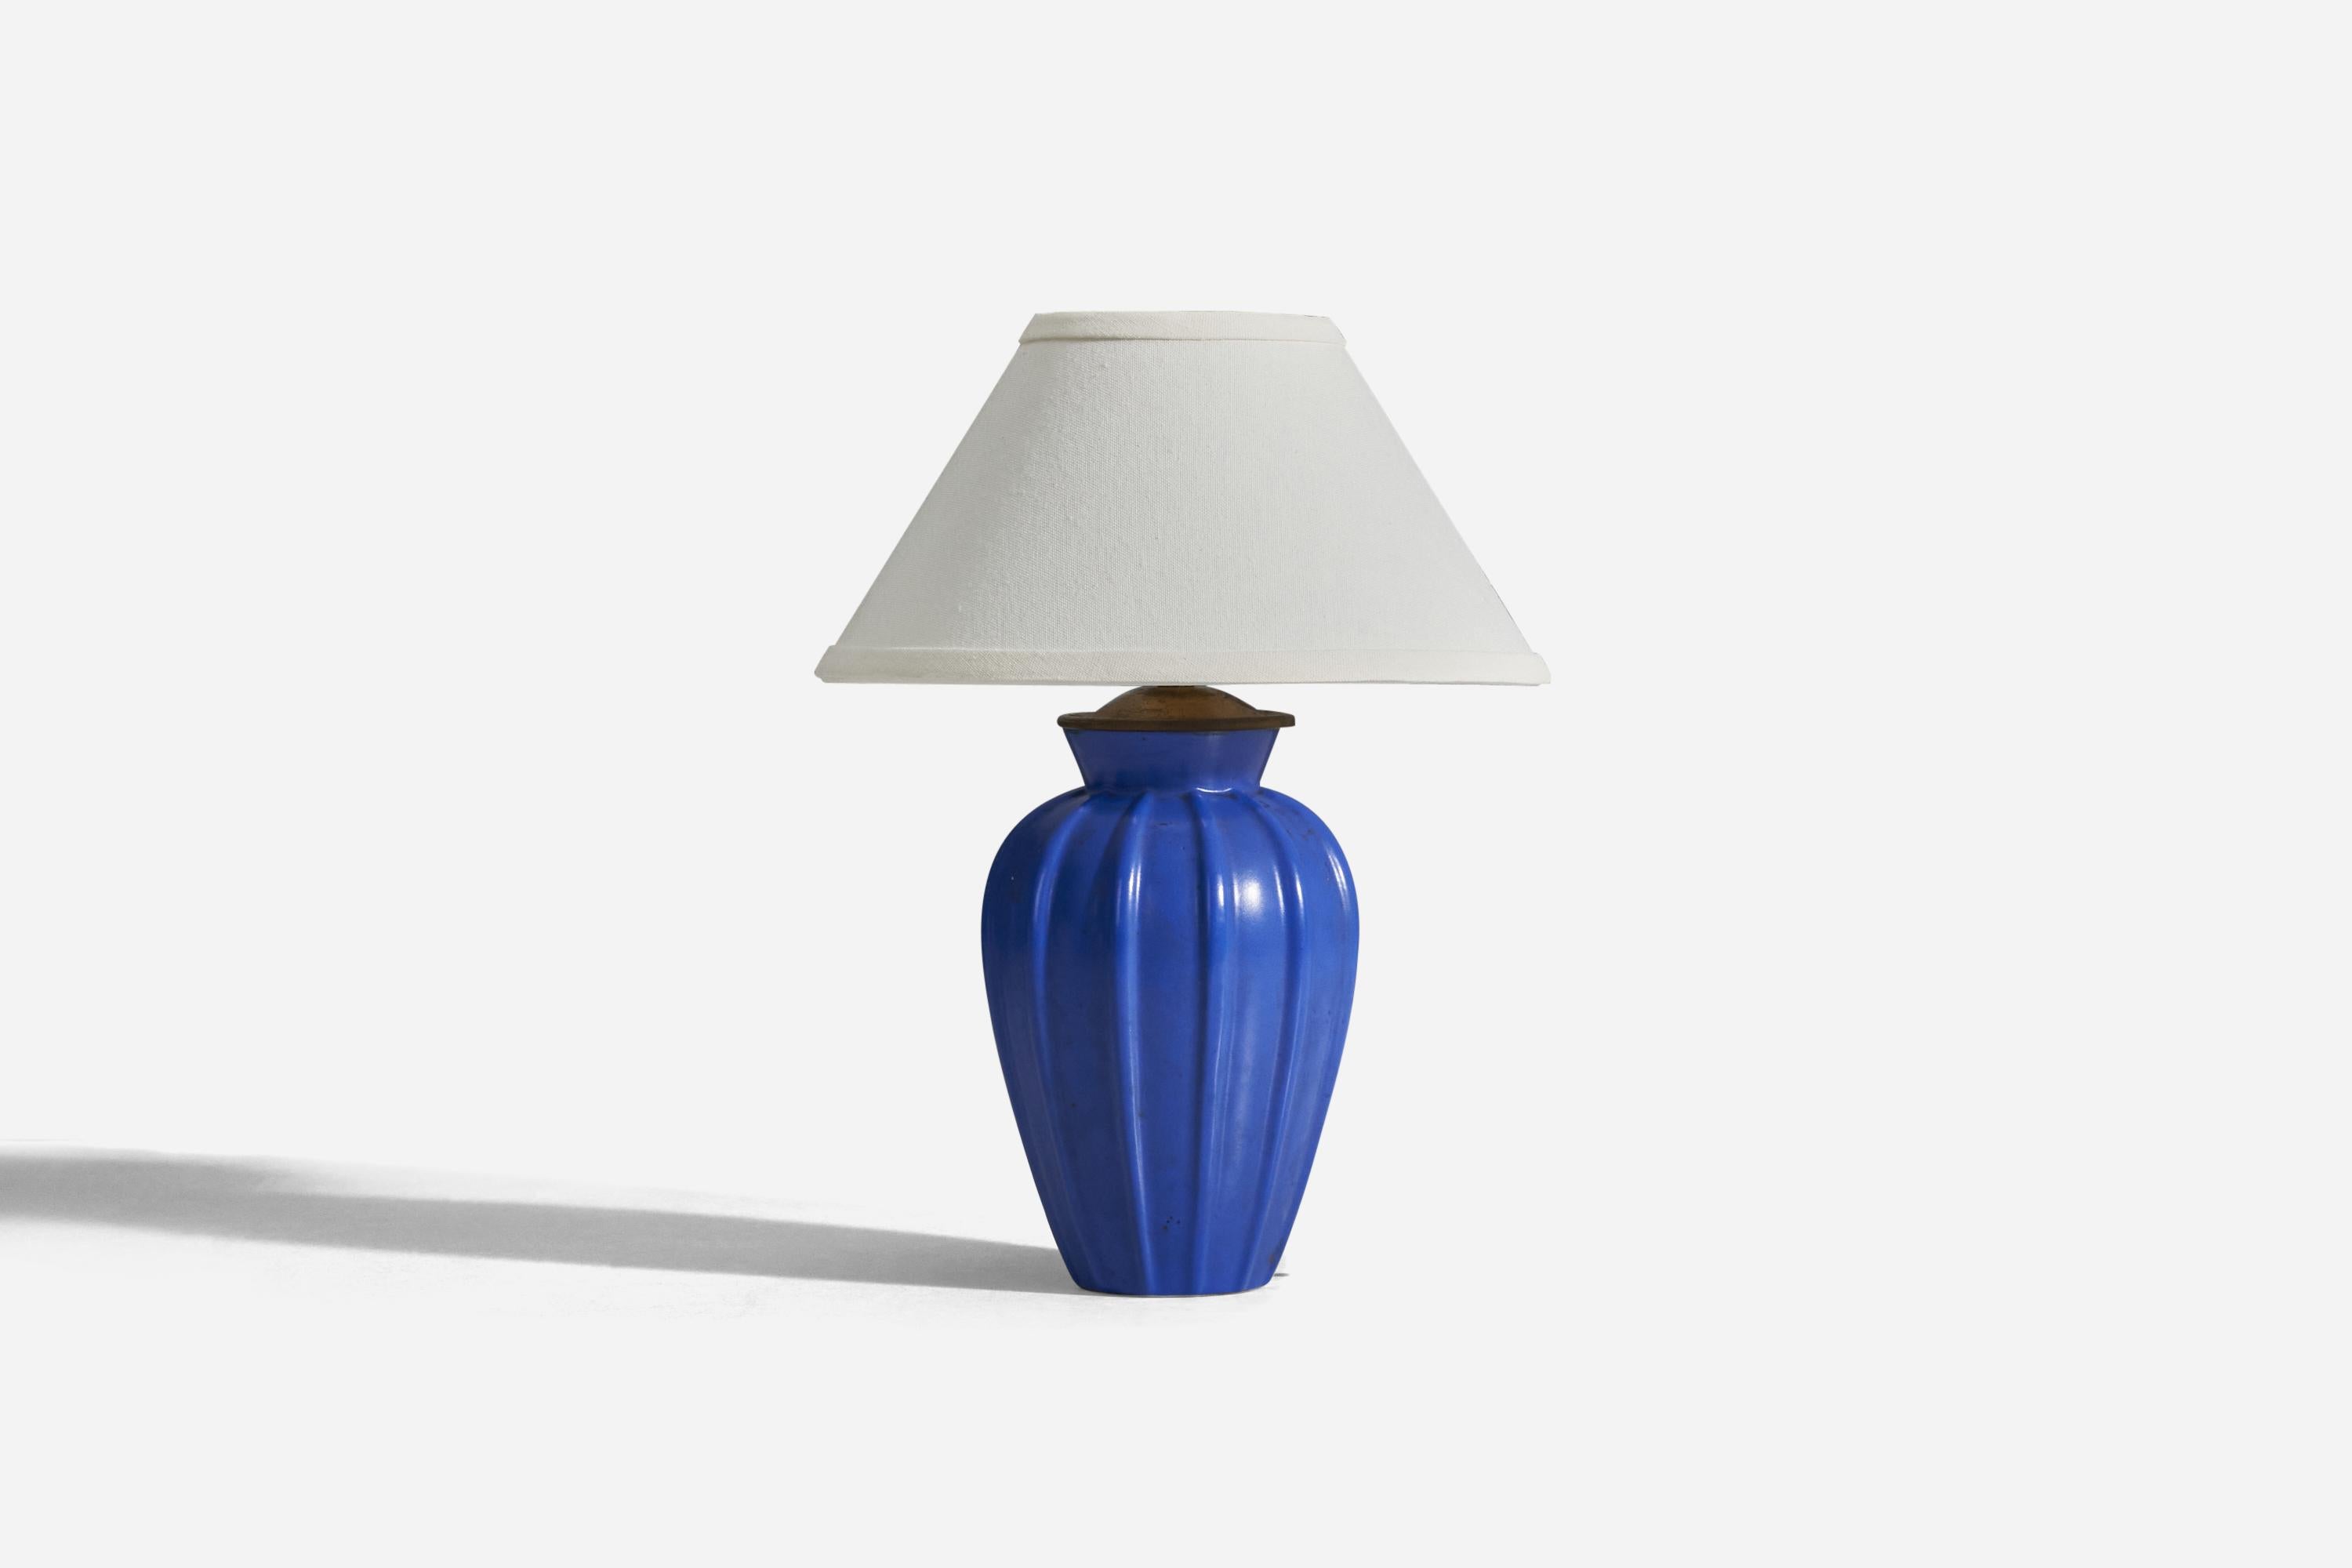 A blue glazed earthenware and brass table lamp designed and produced by Upsala-Ekeby, Sweden, 1940s.

Sold without Lampshade
Dimensions of Lamp (inches) : 11.18 x 5.56 x 5.56 (Height x Width x Depth)
Dimensions of Lampshade (inches) : 4.25 x